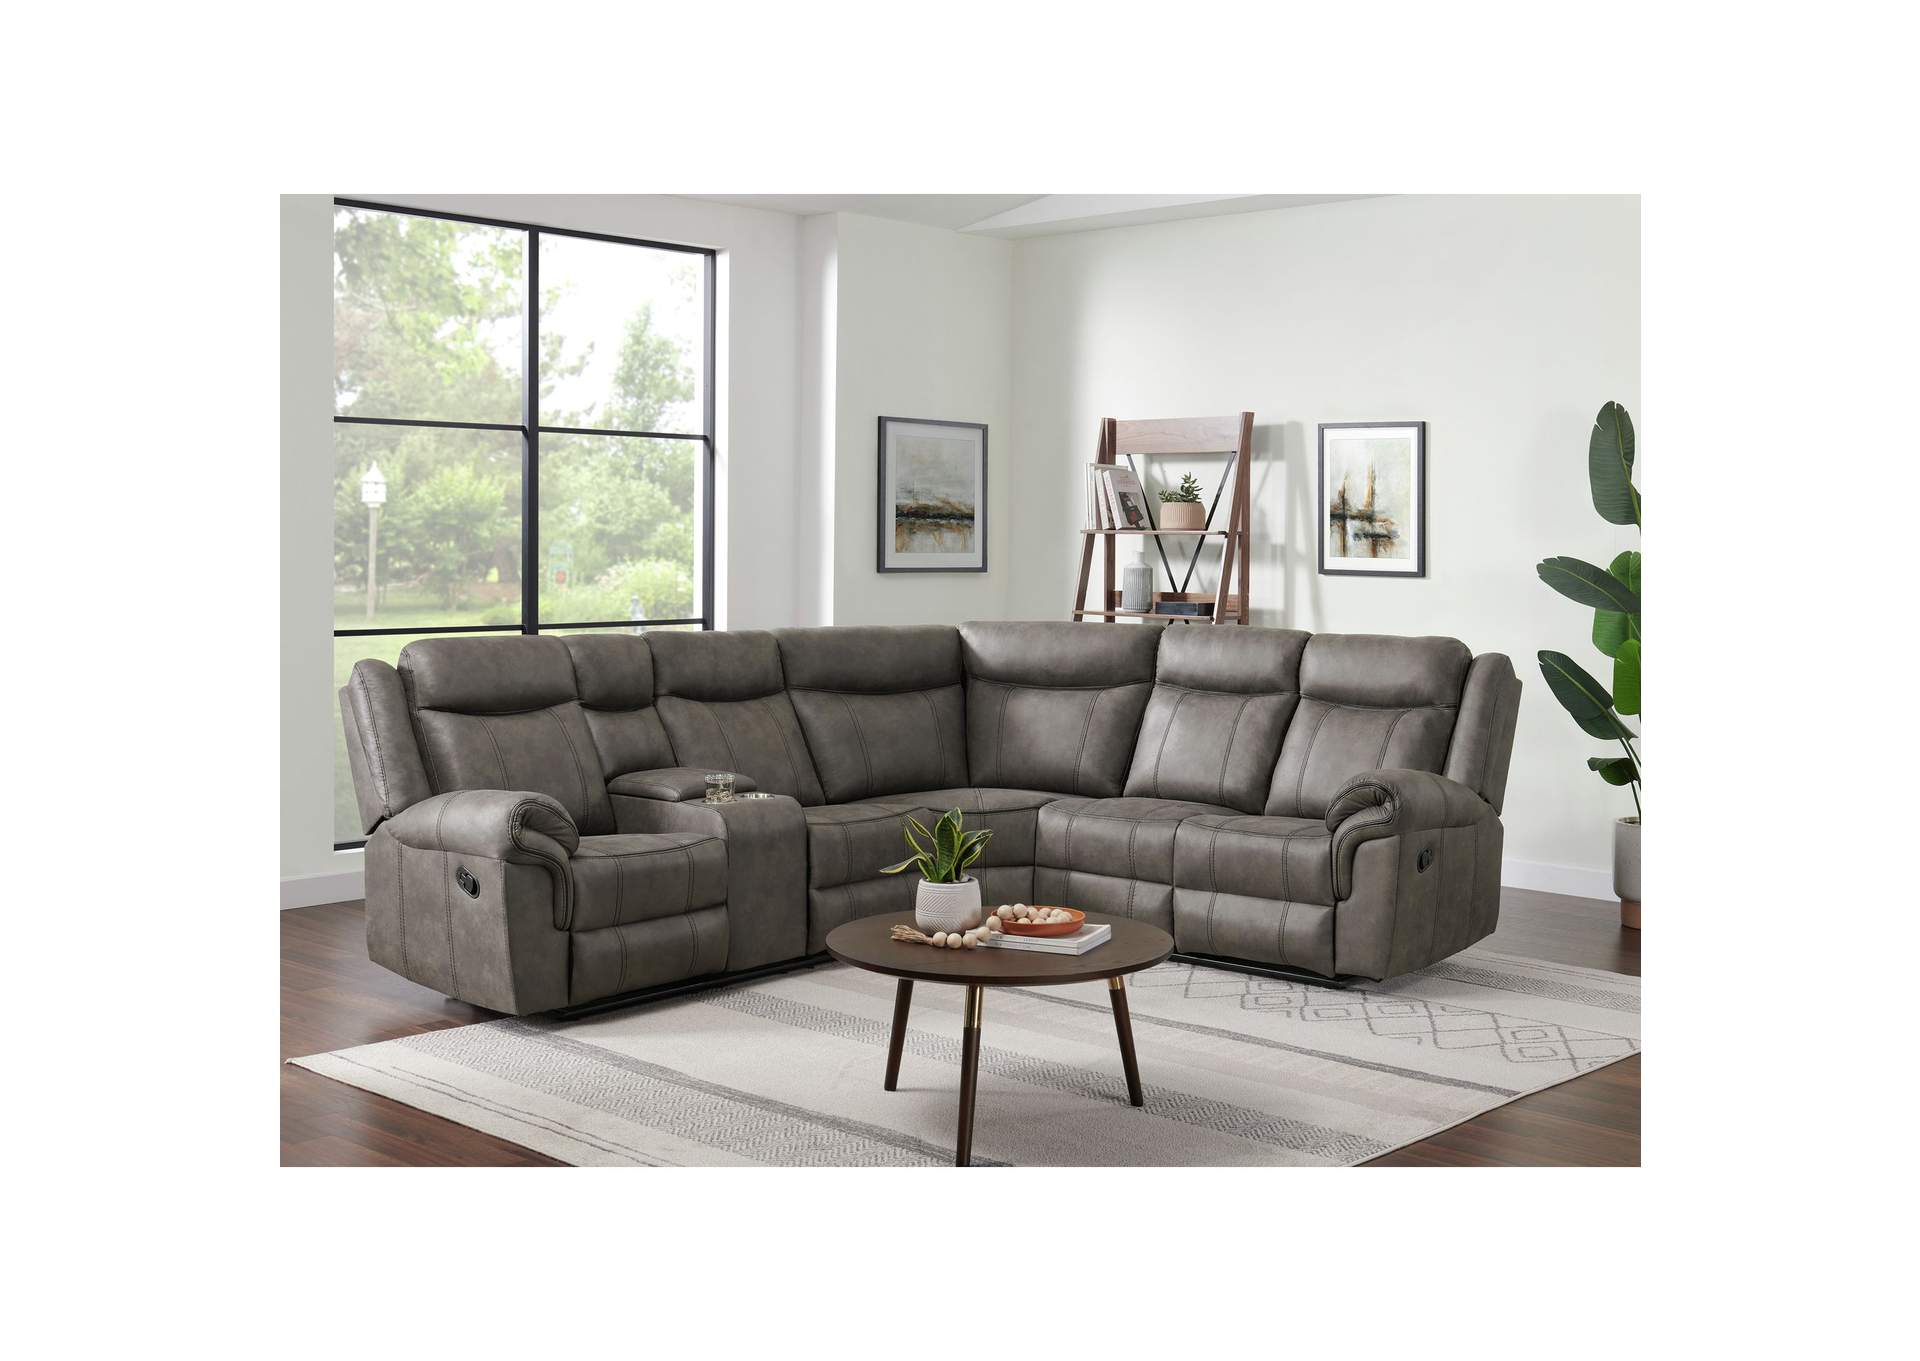 Galloway Sectional Left Hand Facing Loveseat With Console In Js1233With 168 Stone,Elements